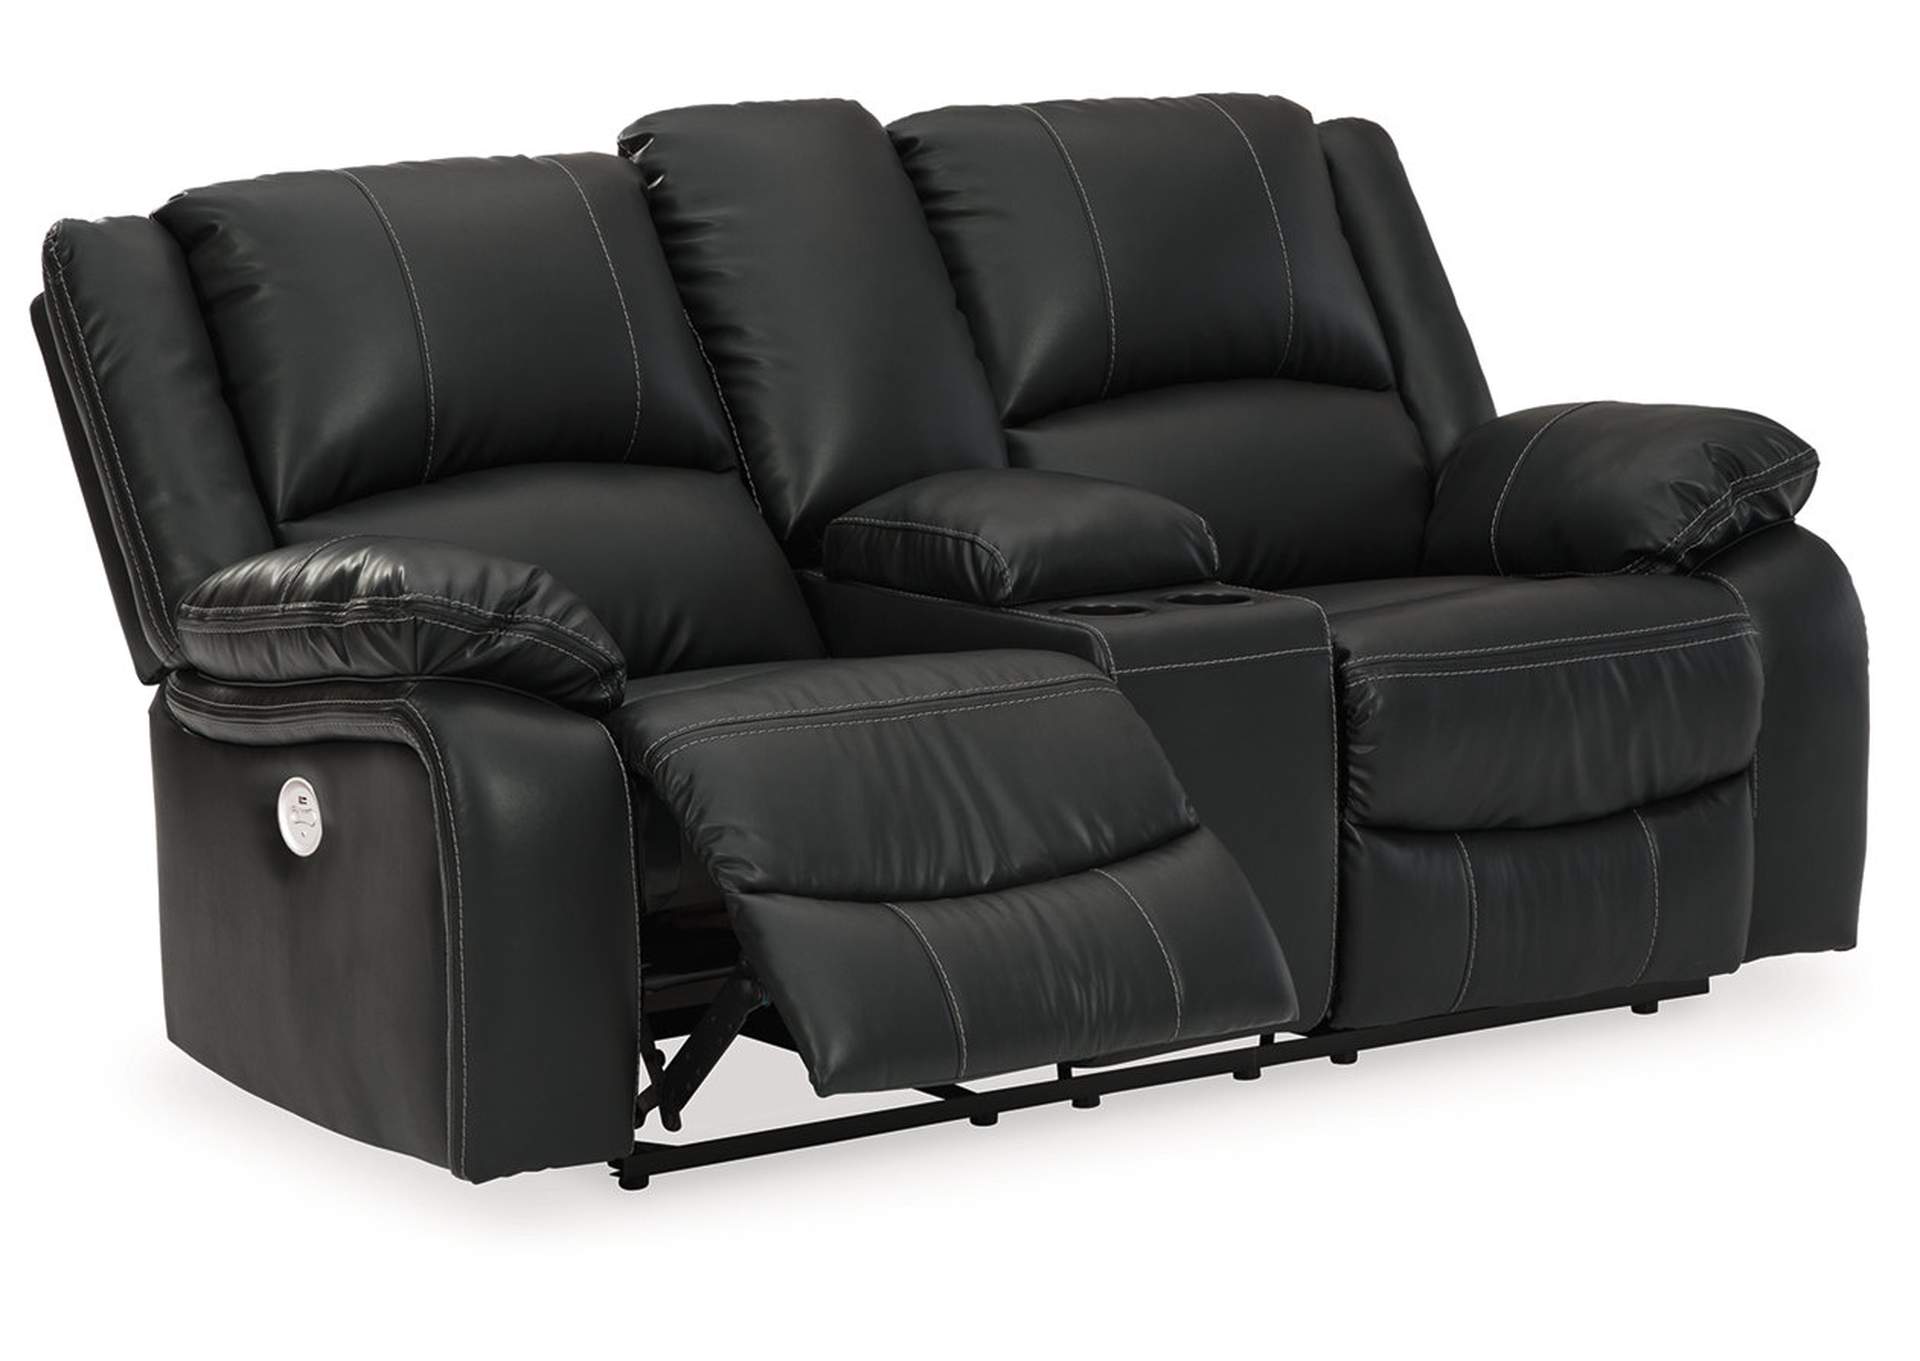 Calderwell Power Reclining Loveseat with Console,Signature Design By Ashley